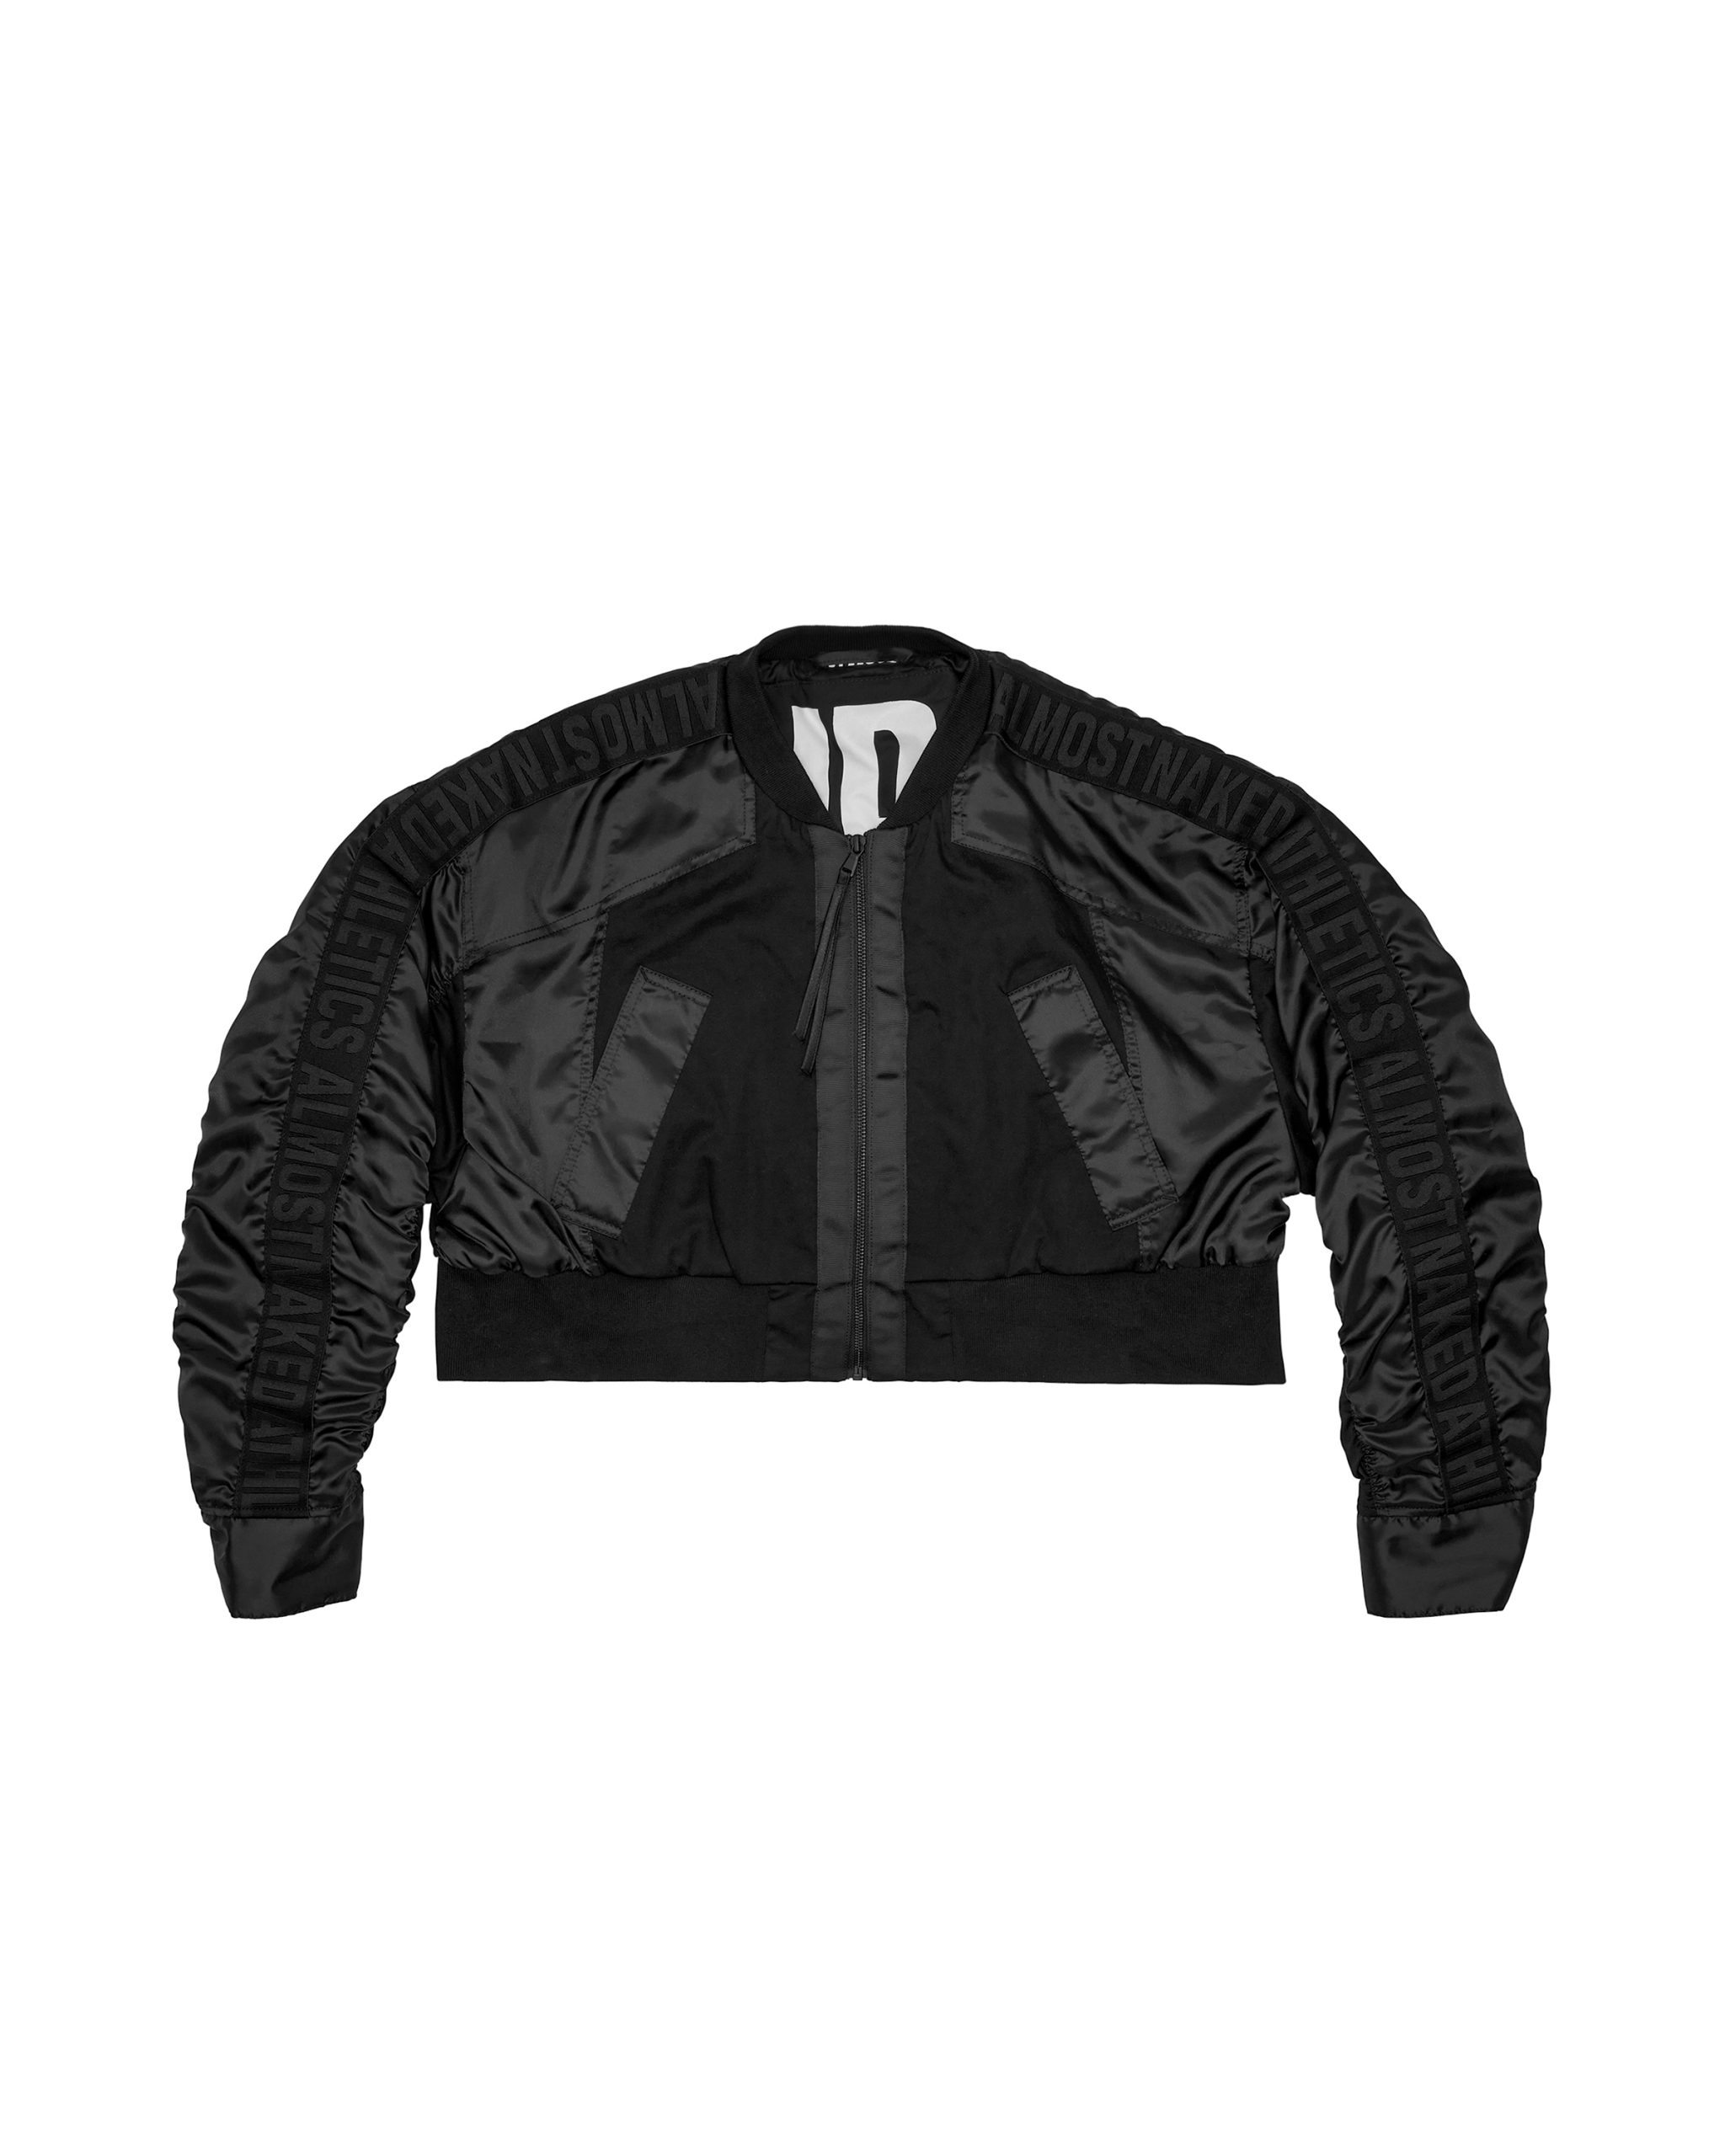 Cropped bomber jacket all black - Almost Naked Athletics